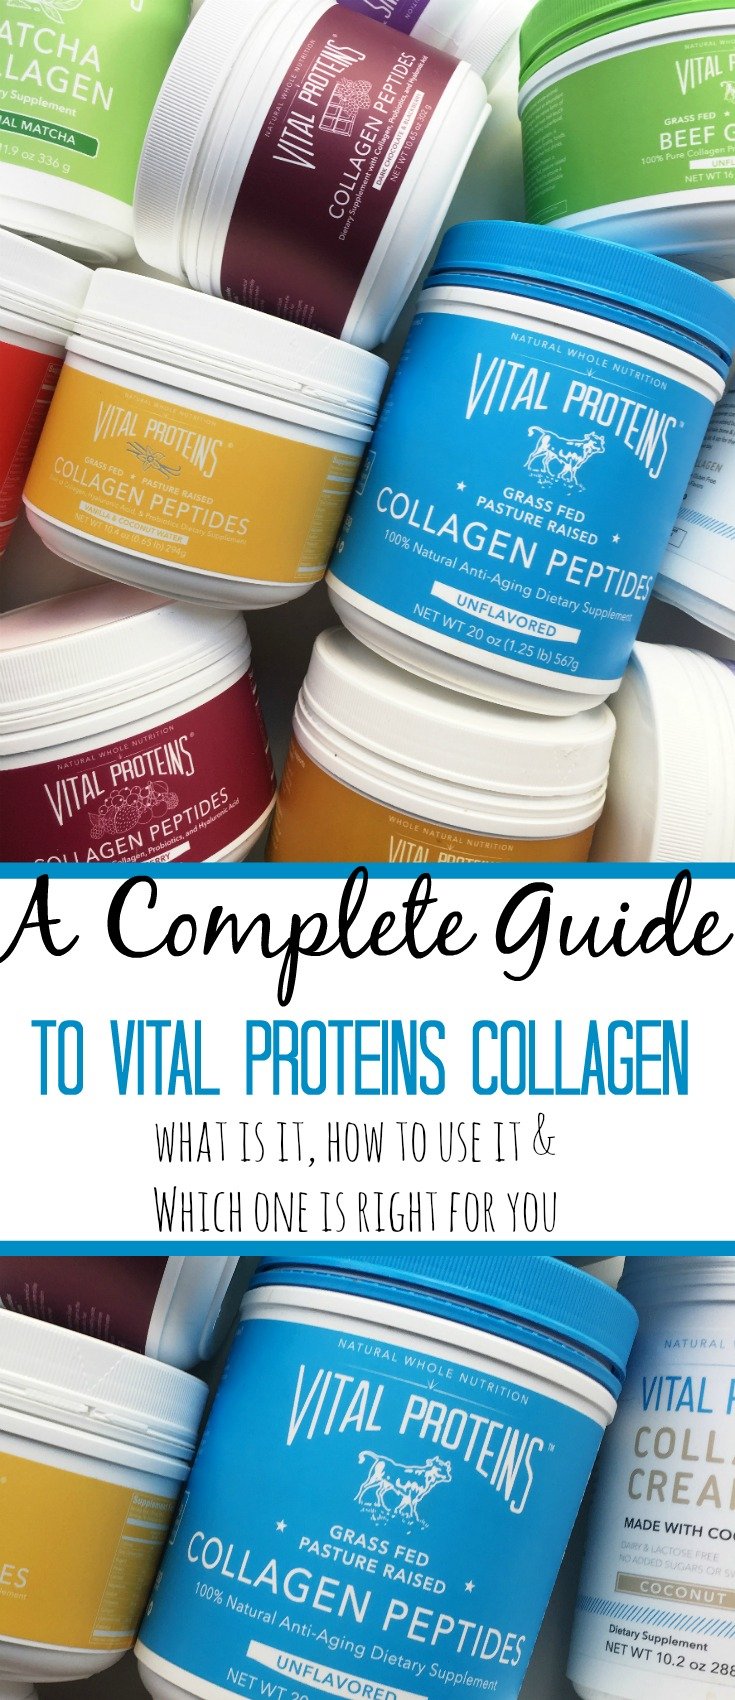 This Vital Proteins guide will walk you through each Vital Proteins collagen product along with how to use Vital Proteins collagen. Even how to use gelatin! It's no secret I'm a huge fan of Vital Proteins. After taking collagen peptides for over a year now, I feel fairly confident in saying I'm a self-proclaimed expert